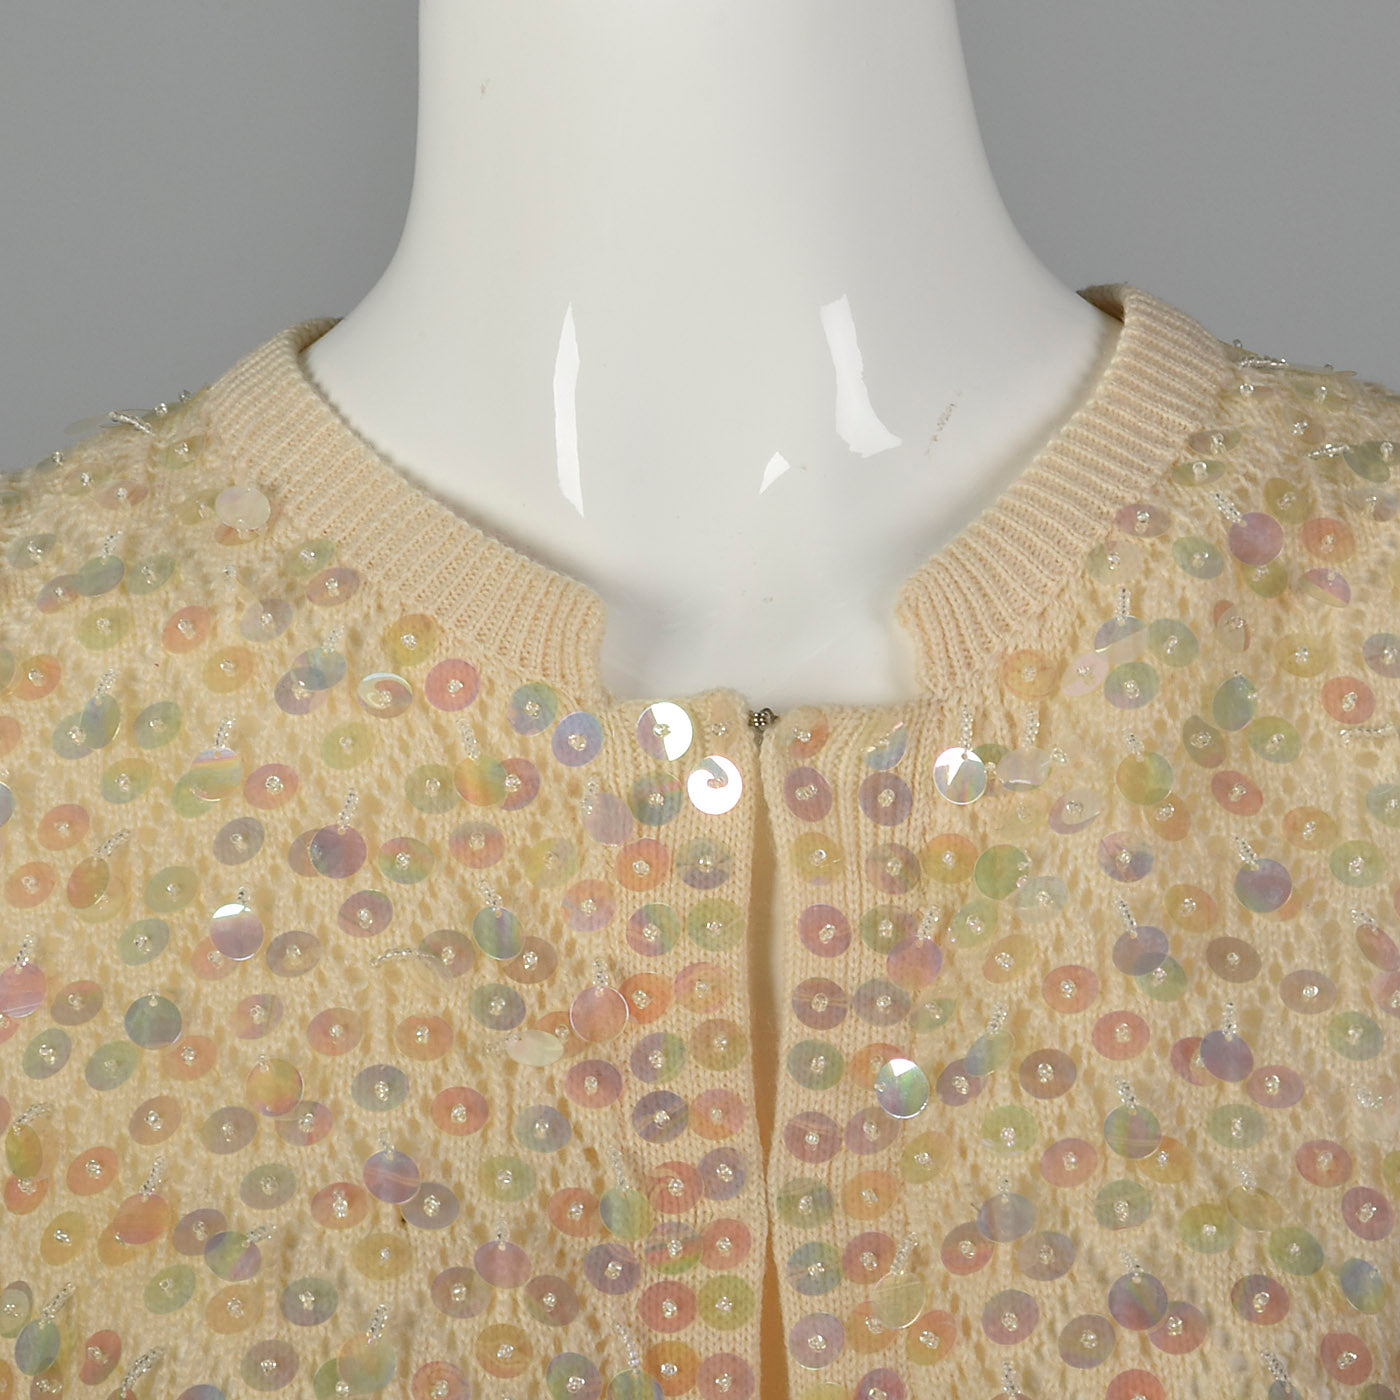 1960s Deadstock Wool Cardigan with Dangling Paillettes